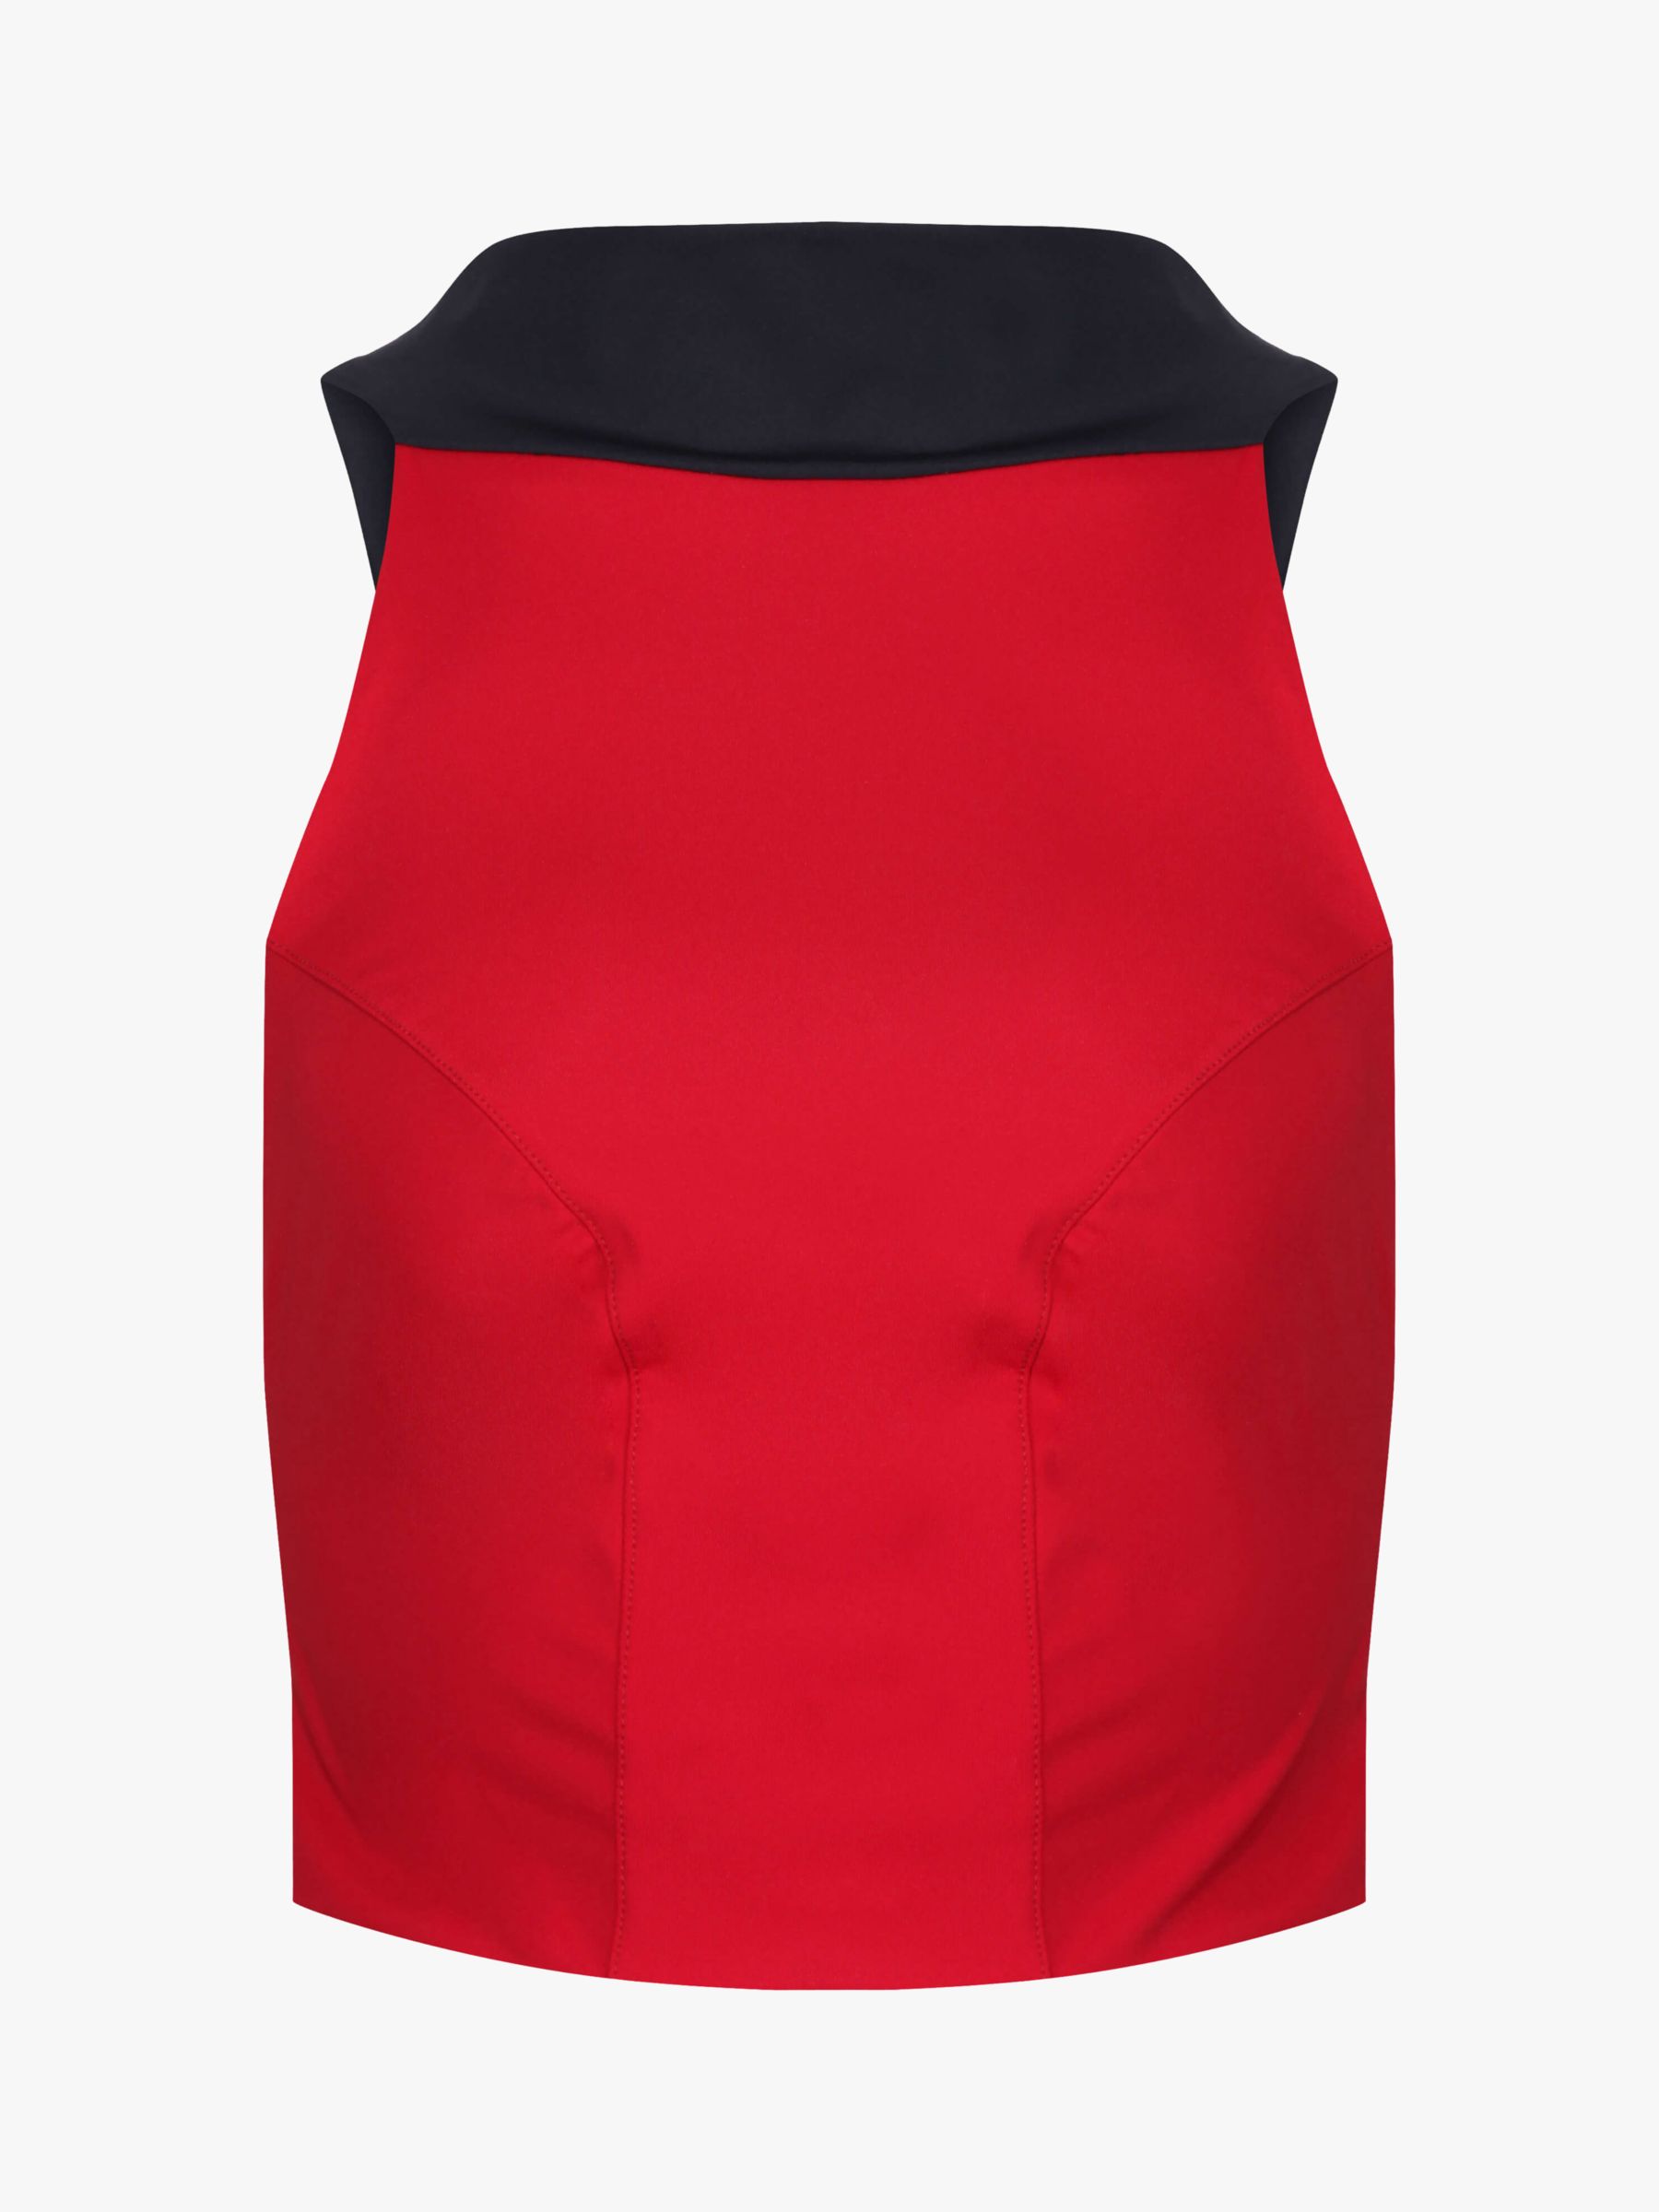 Davy J The Reversible Crop Top, Red/Black, 8